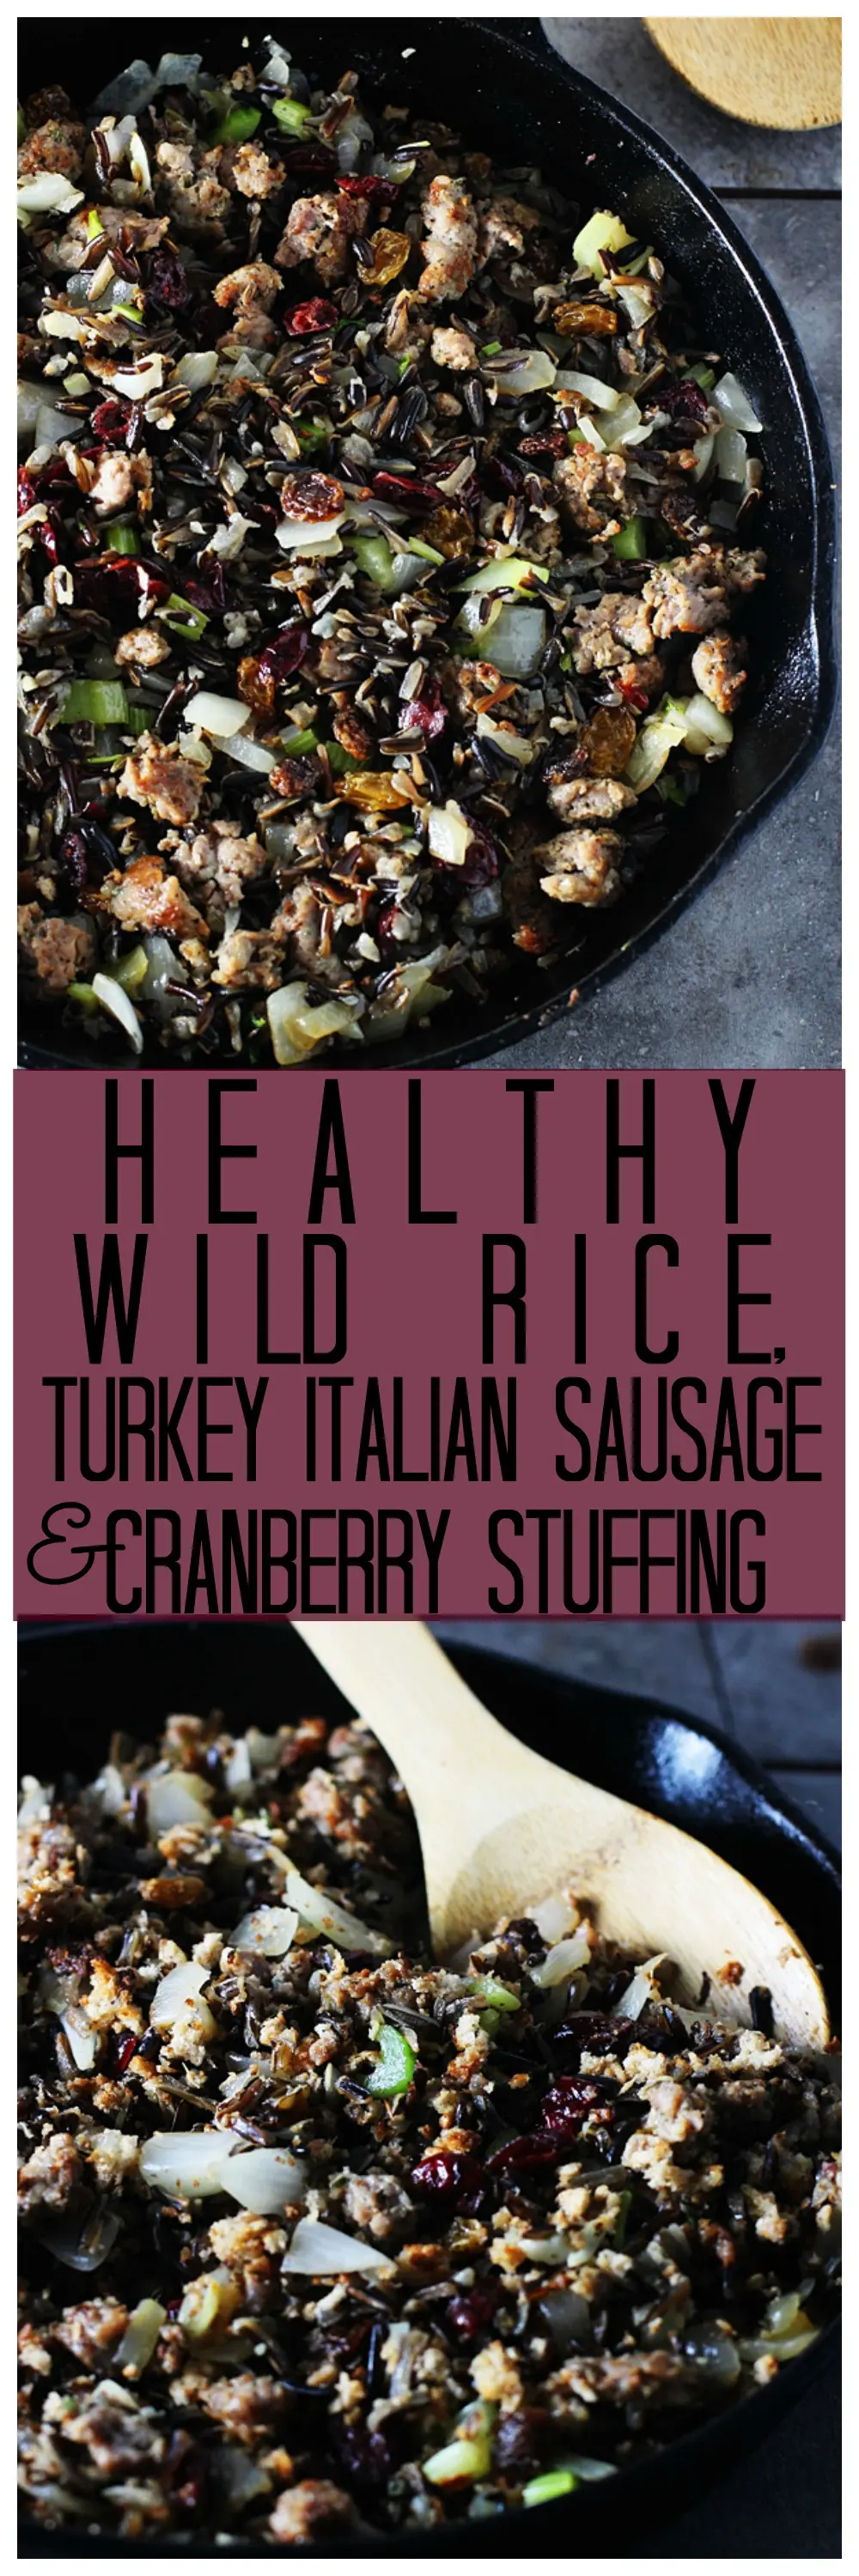 Healthy Wild Rice Stuffing with Turkey Italian Sausage, Cranberries and Pecans